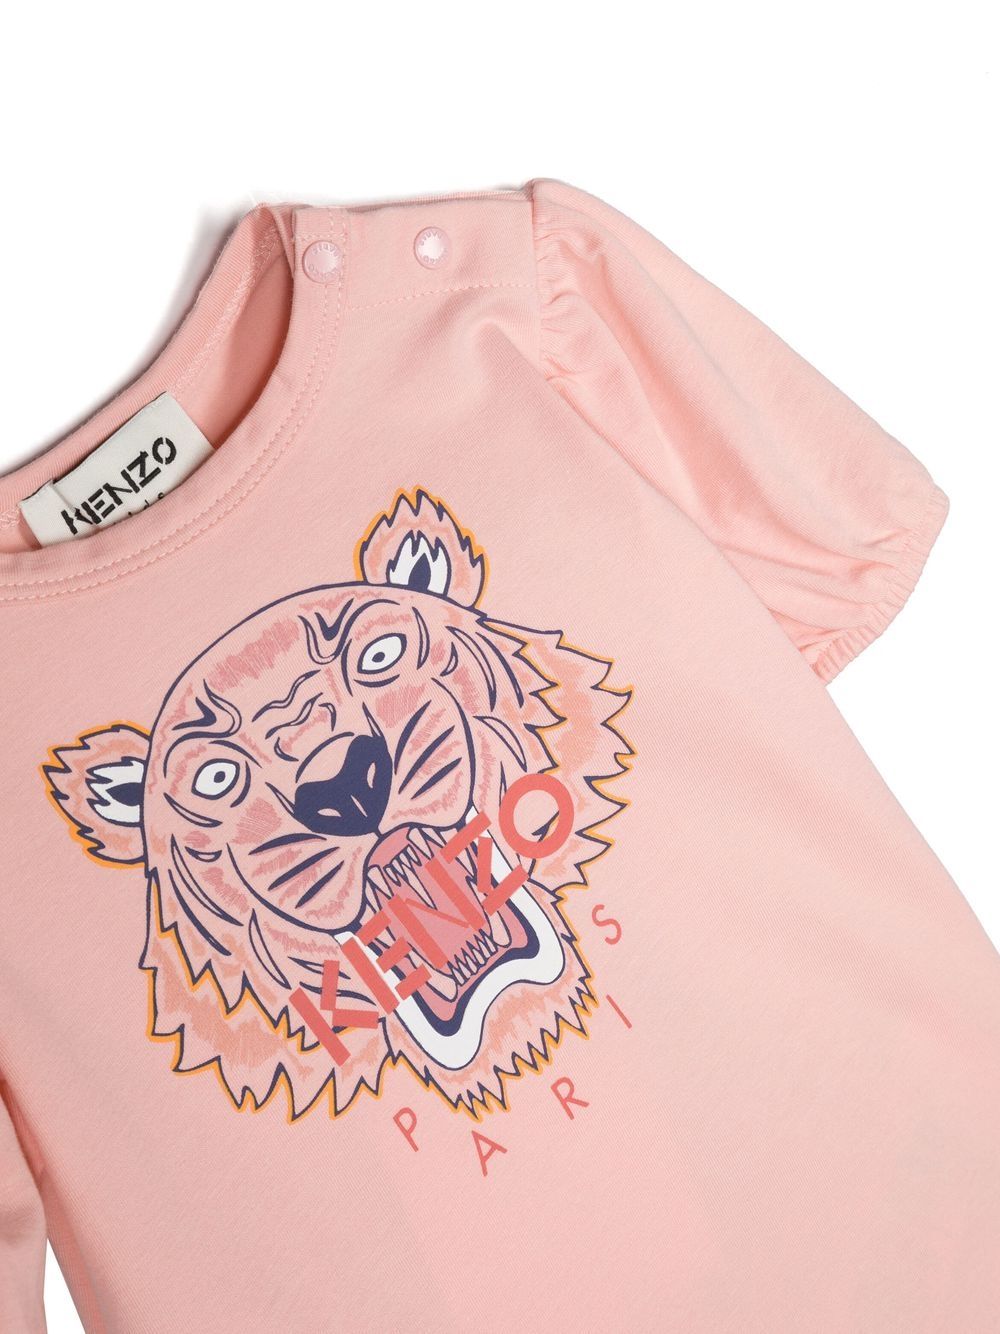 KENZO 'tiger' T-shirt in Pink